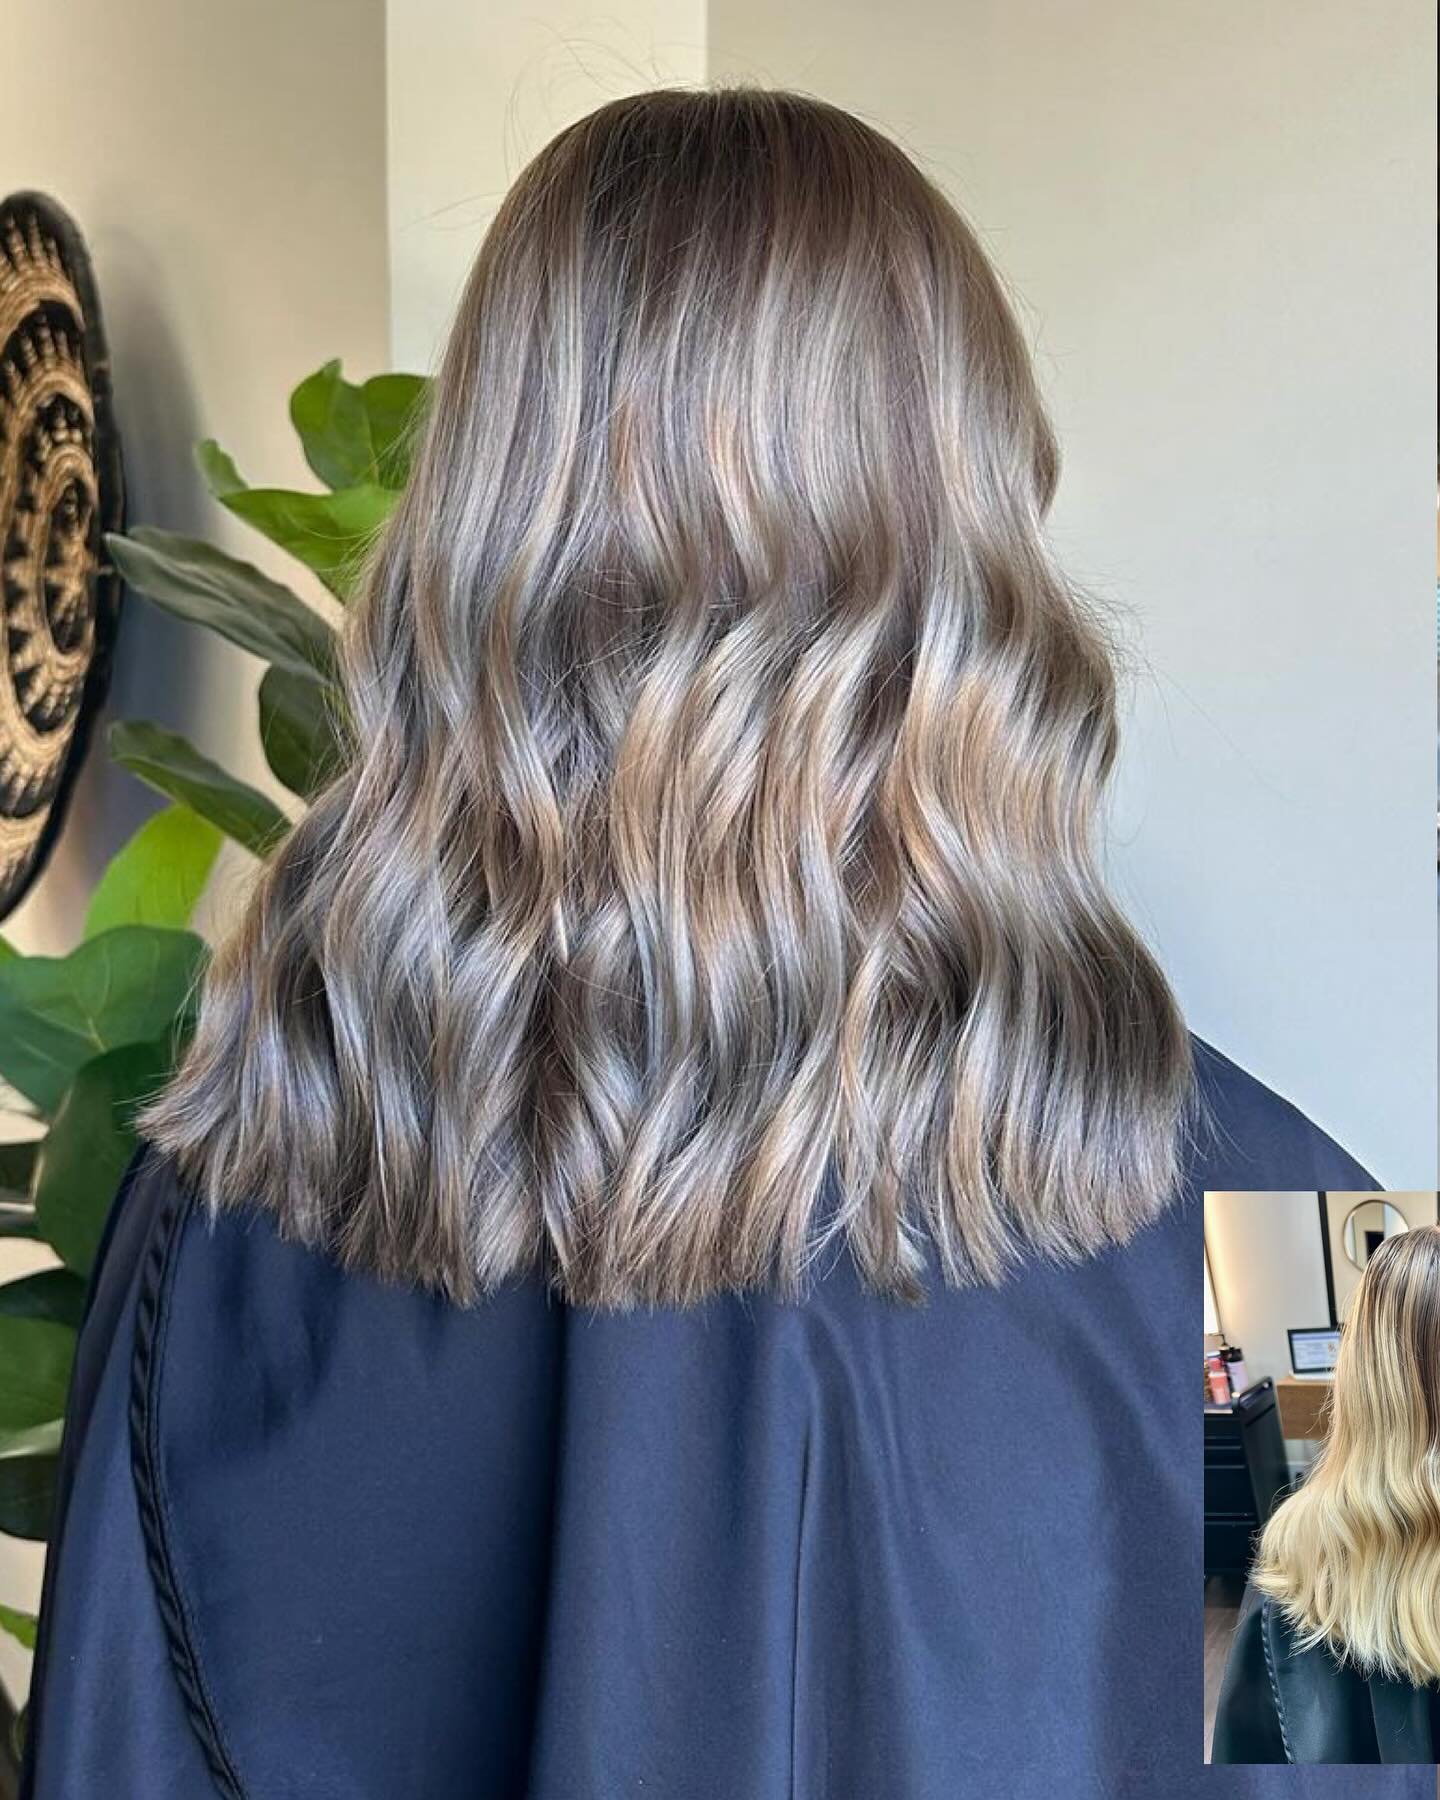 It&rsquo;s truly rewarding to witness the ongoing growth + development of our hair apprentices like @hair__by_alexis ✨ such a beautiful dimensional color! 🫶🏼